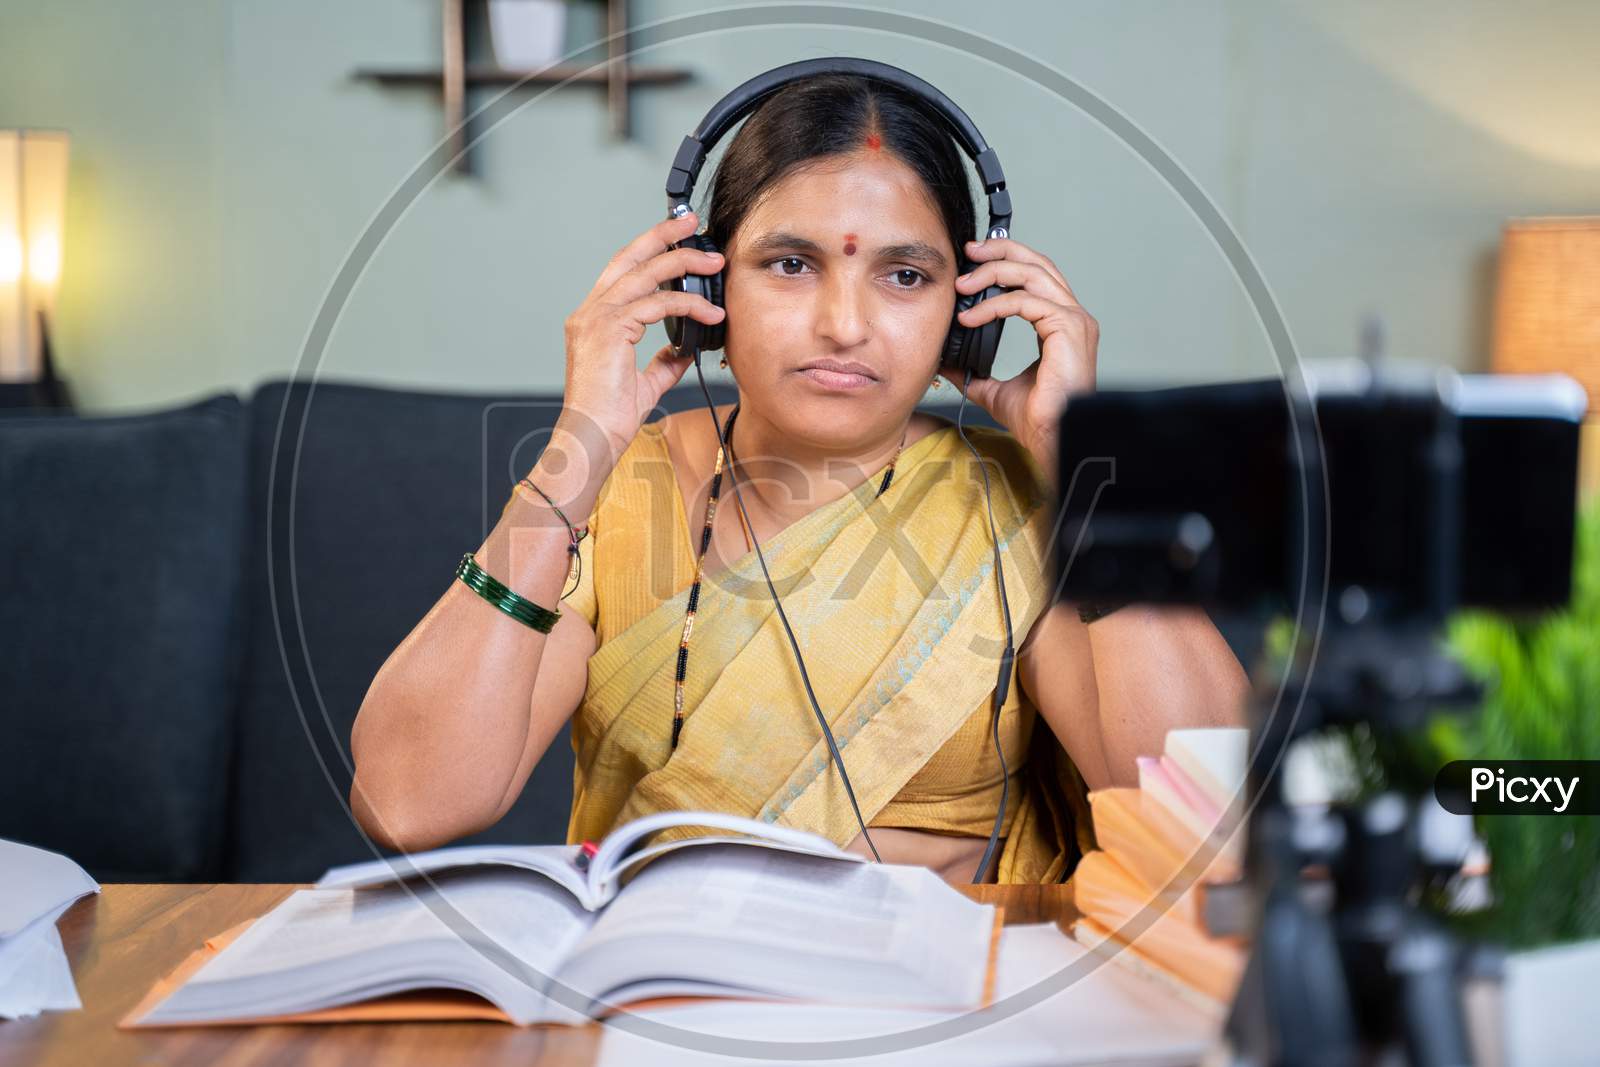 Indian Woman Preparing For Online Class By Wearing Headphone In Front Of Mobile Phone At Home - Concept Of Virtual Education And New Normal Lifestyle.